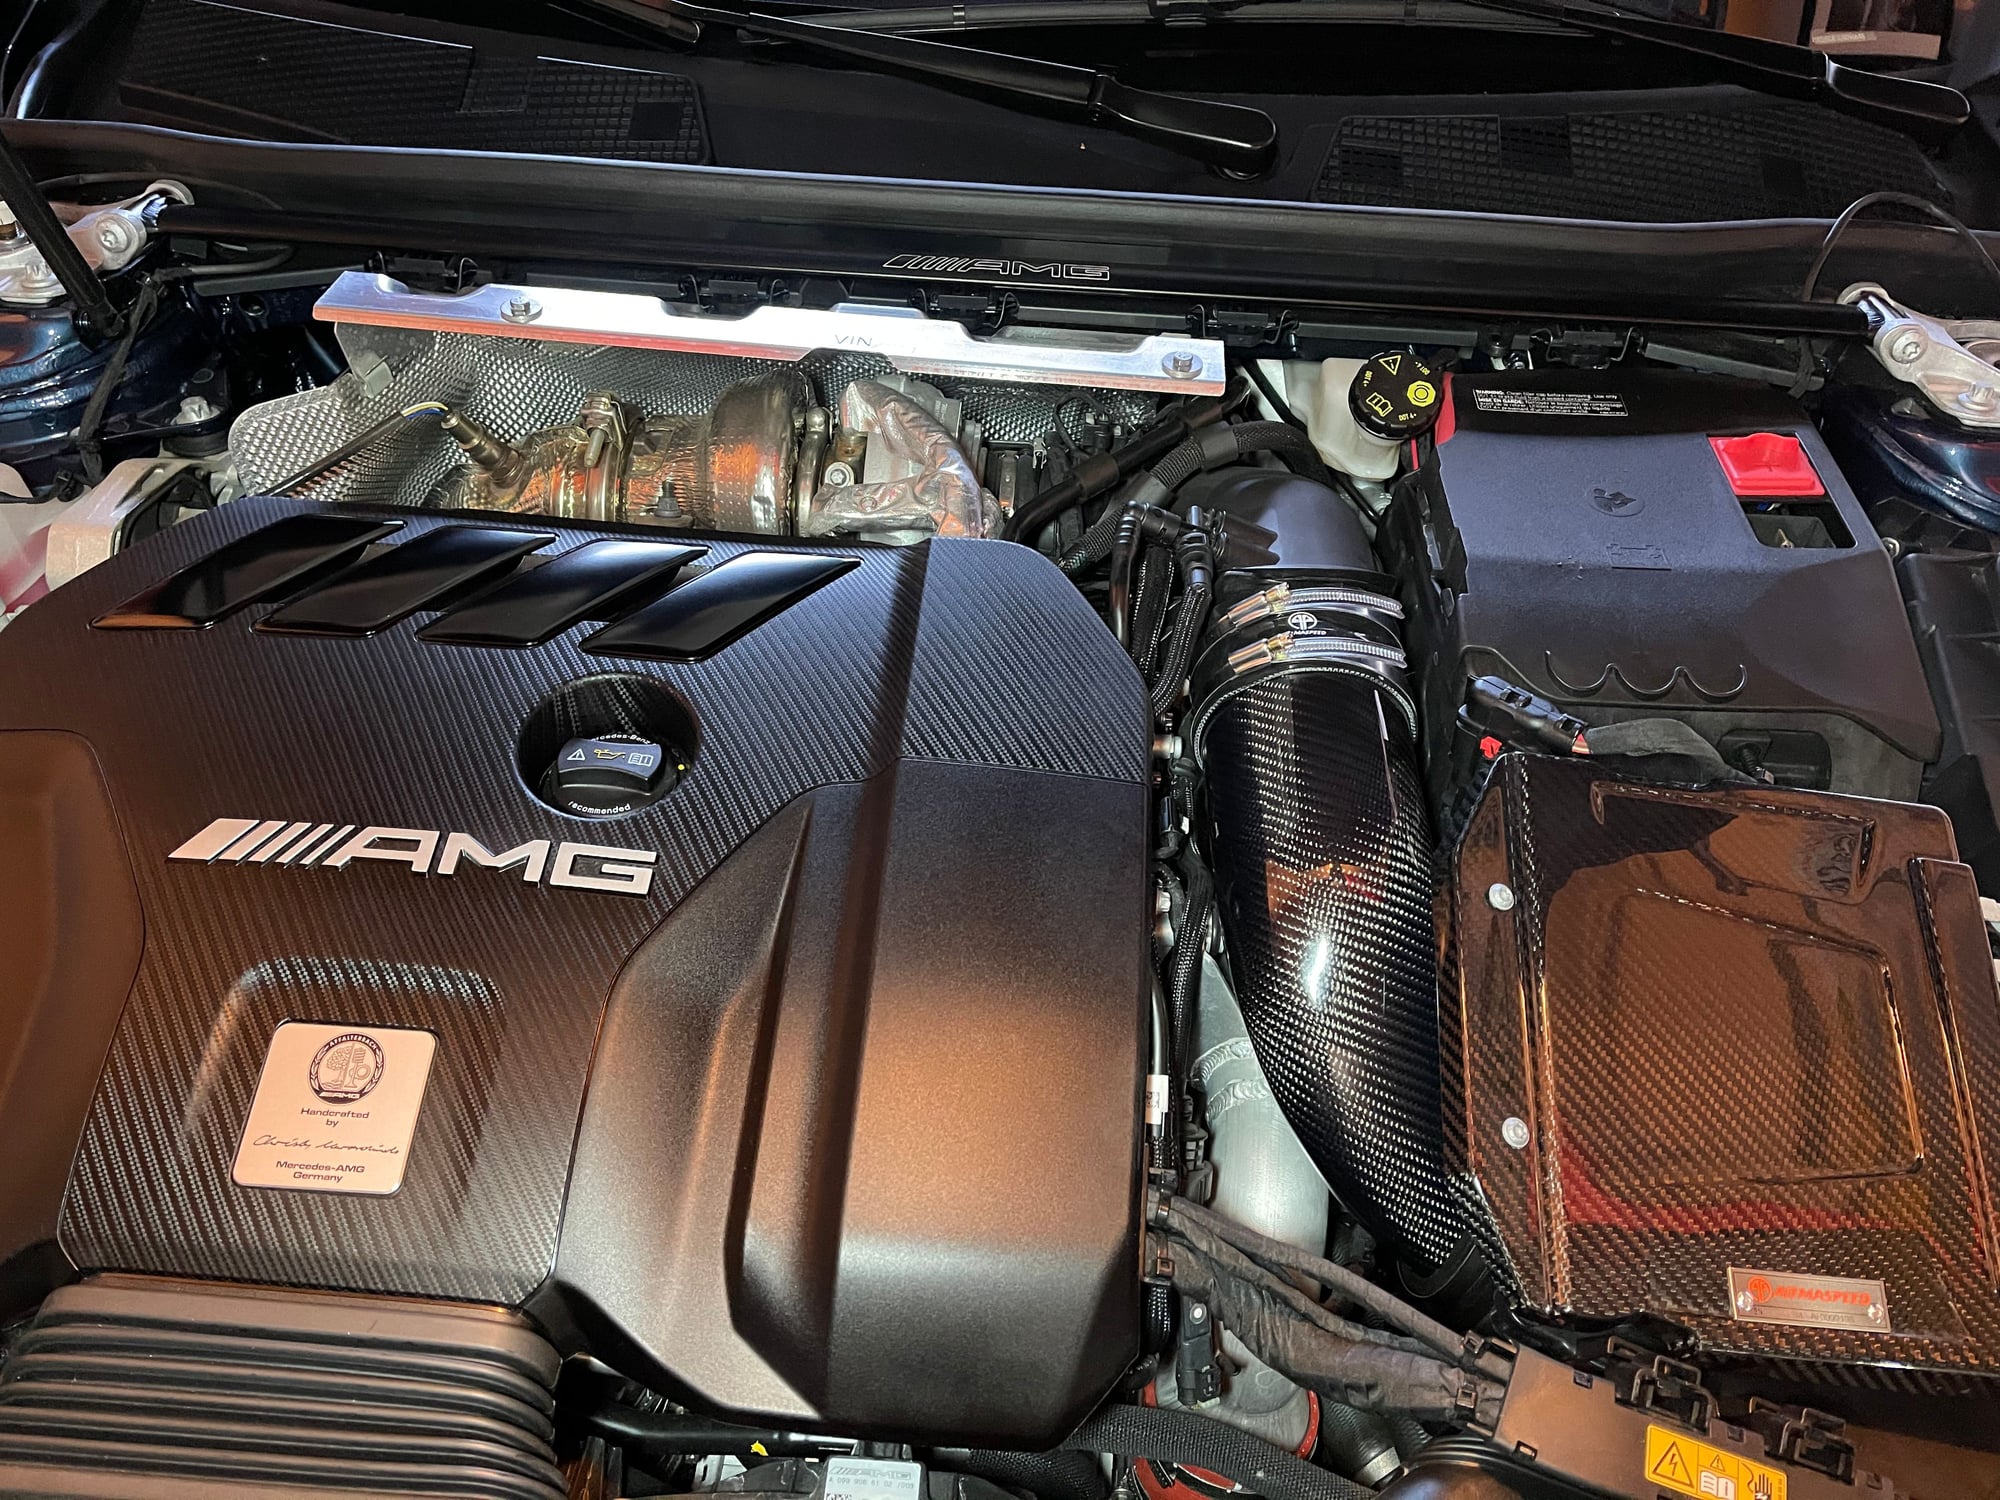 Engine - Intake/Fuel - Armaspeed Carbon Fiber Intake for 2020 and on CLA45 AMG - Used - 2020 to 2021 Mercedes-Benz CLA45 AMG - Newport Beach, CA 92663, United States